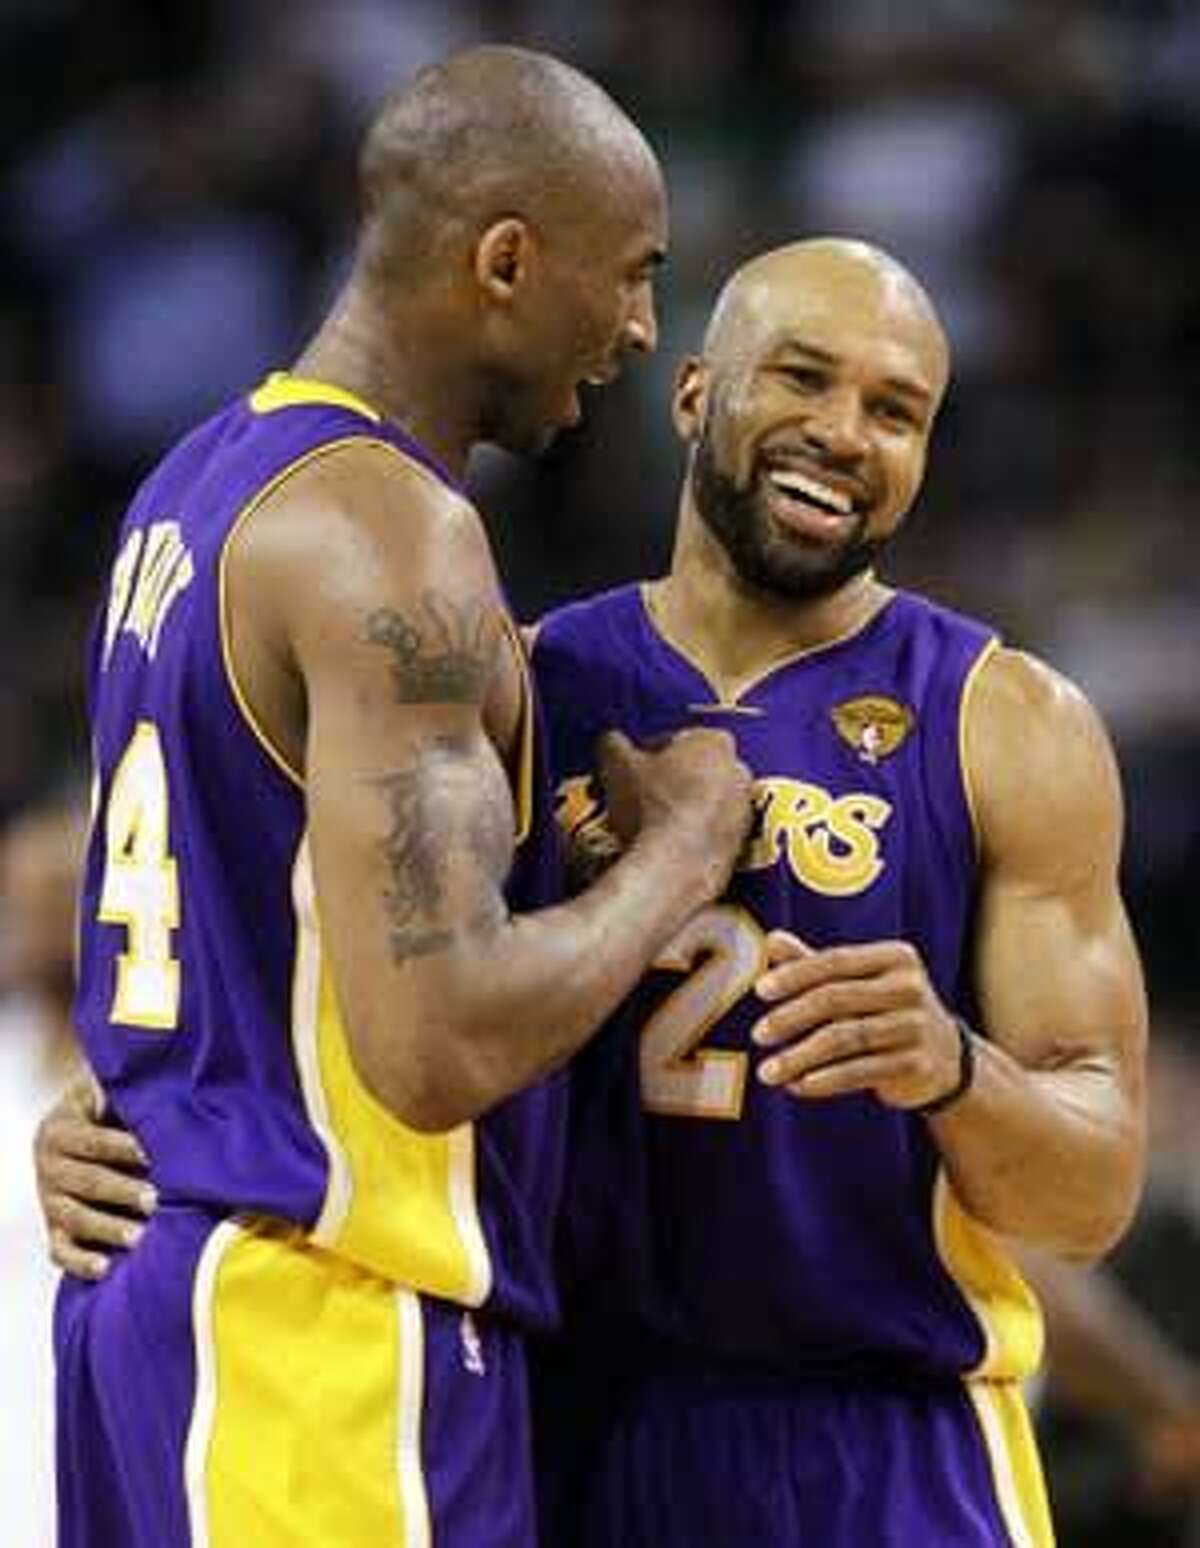 AP Los Angeles Lakers guards Kobe Bryant, left, and Derek Fisher react during the fourth quarter in Game 3 of the NBA finals against the Boston Celtics on Tuesday in Boston.